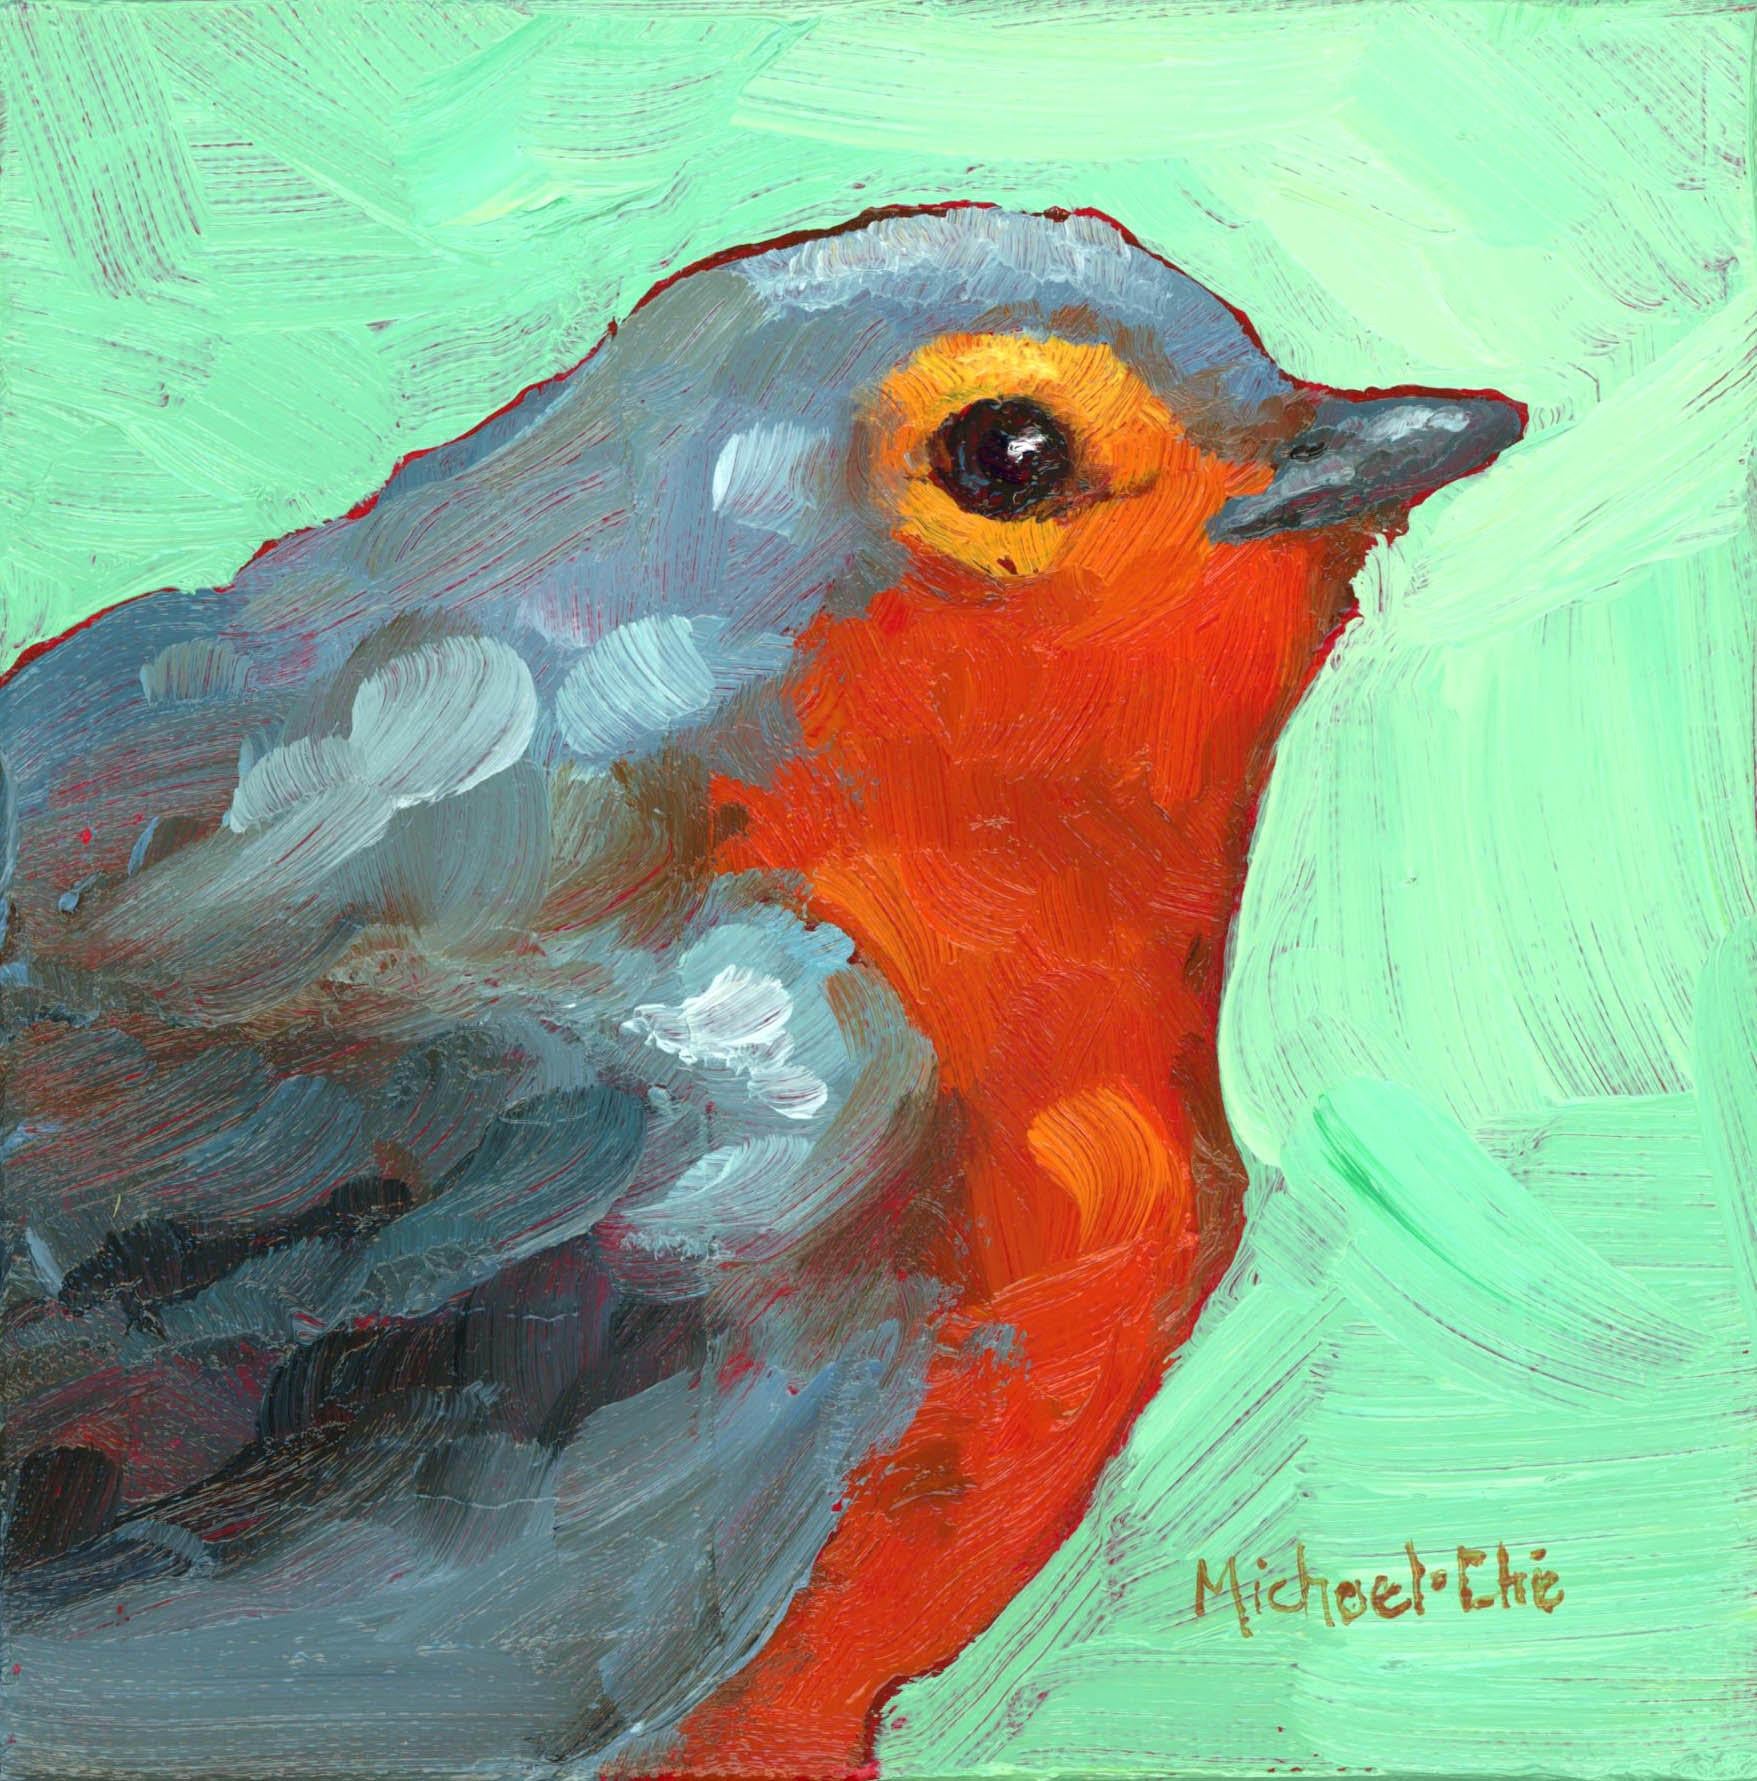 Michael-Che Swisher Animal Painting - "All Cozy" impasto oil painting of a grey and orange bird on green background